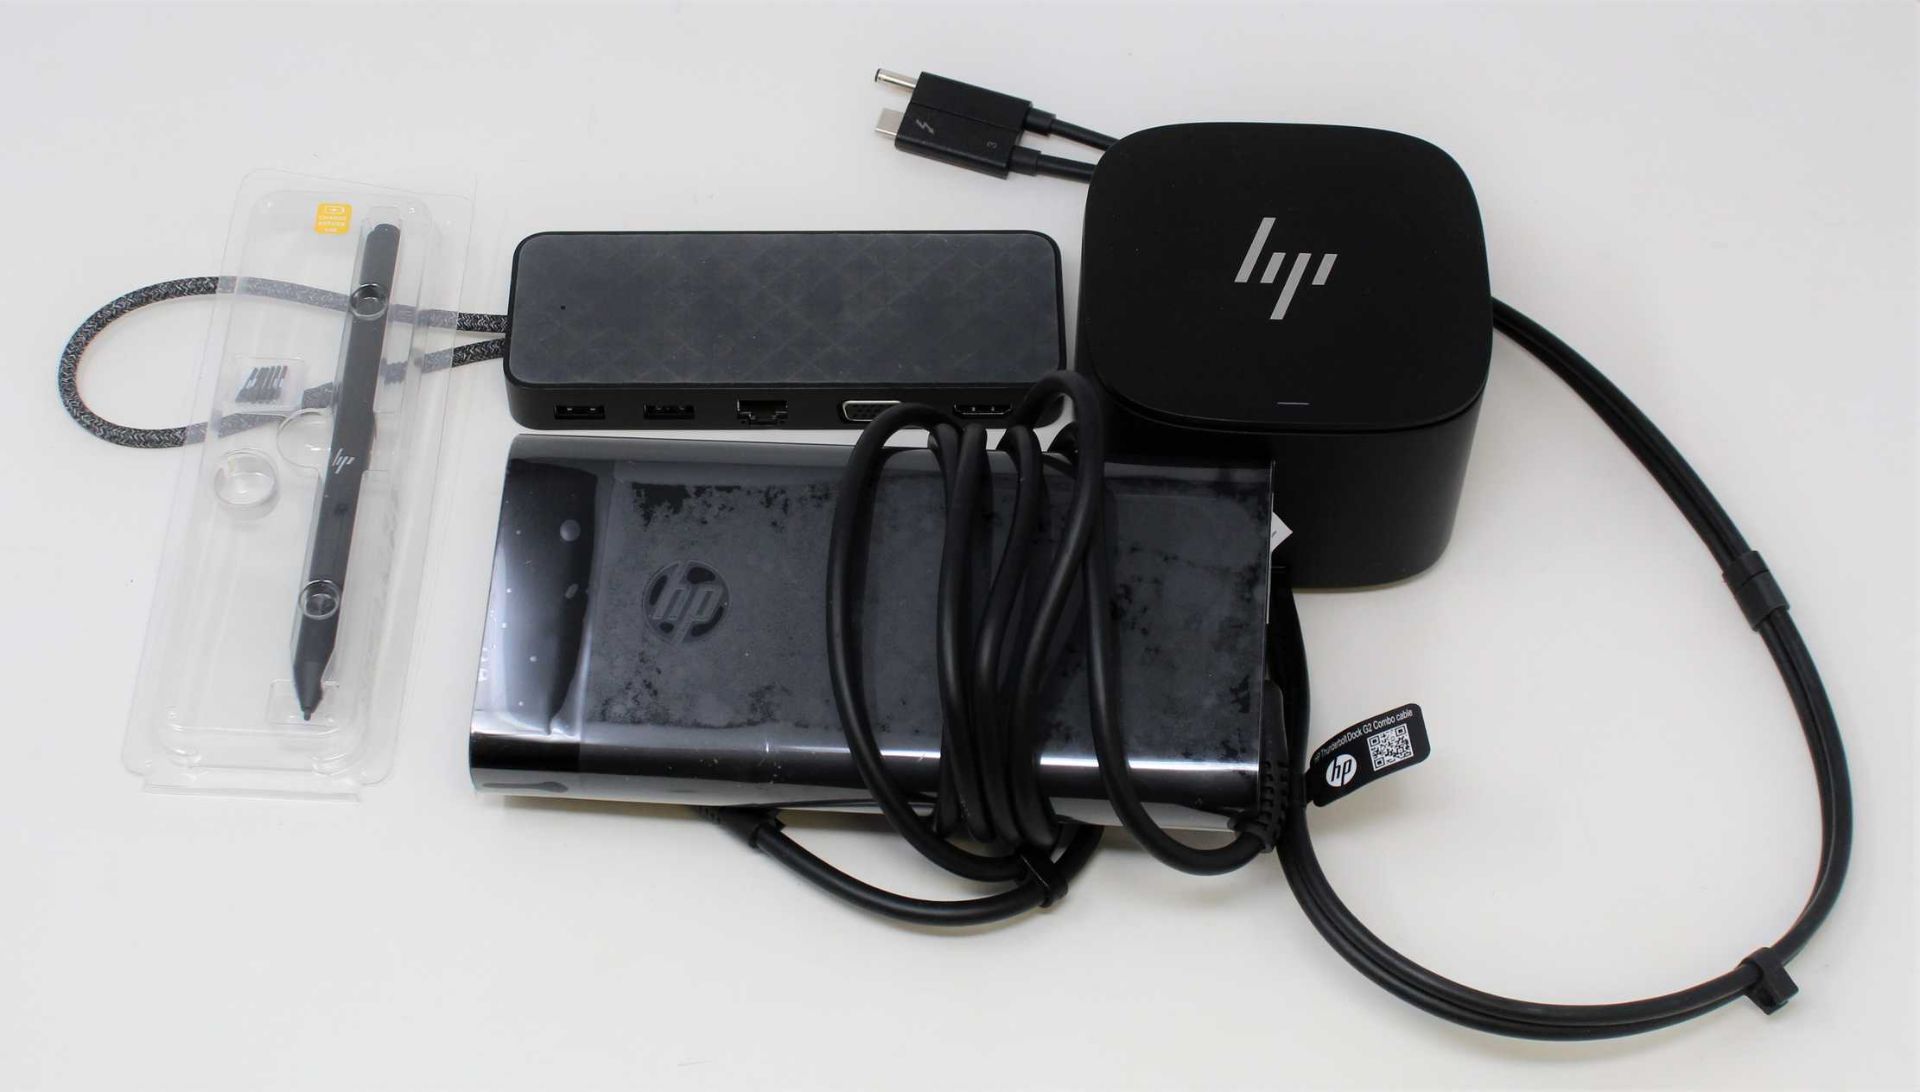 A pre-owned HP Thunderbolt Dock G2 230W with Combo Cable, a pre-owned HP 230W Power Adaptor, a pre-